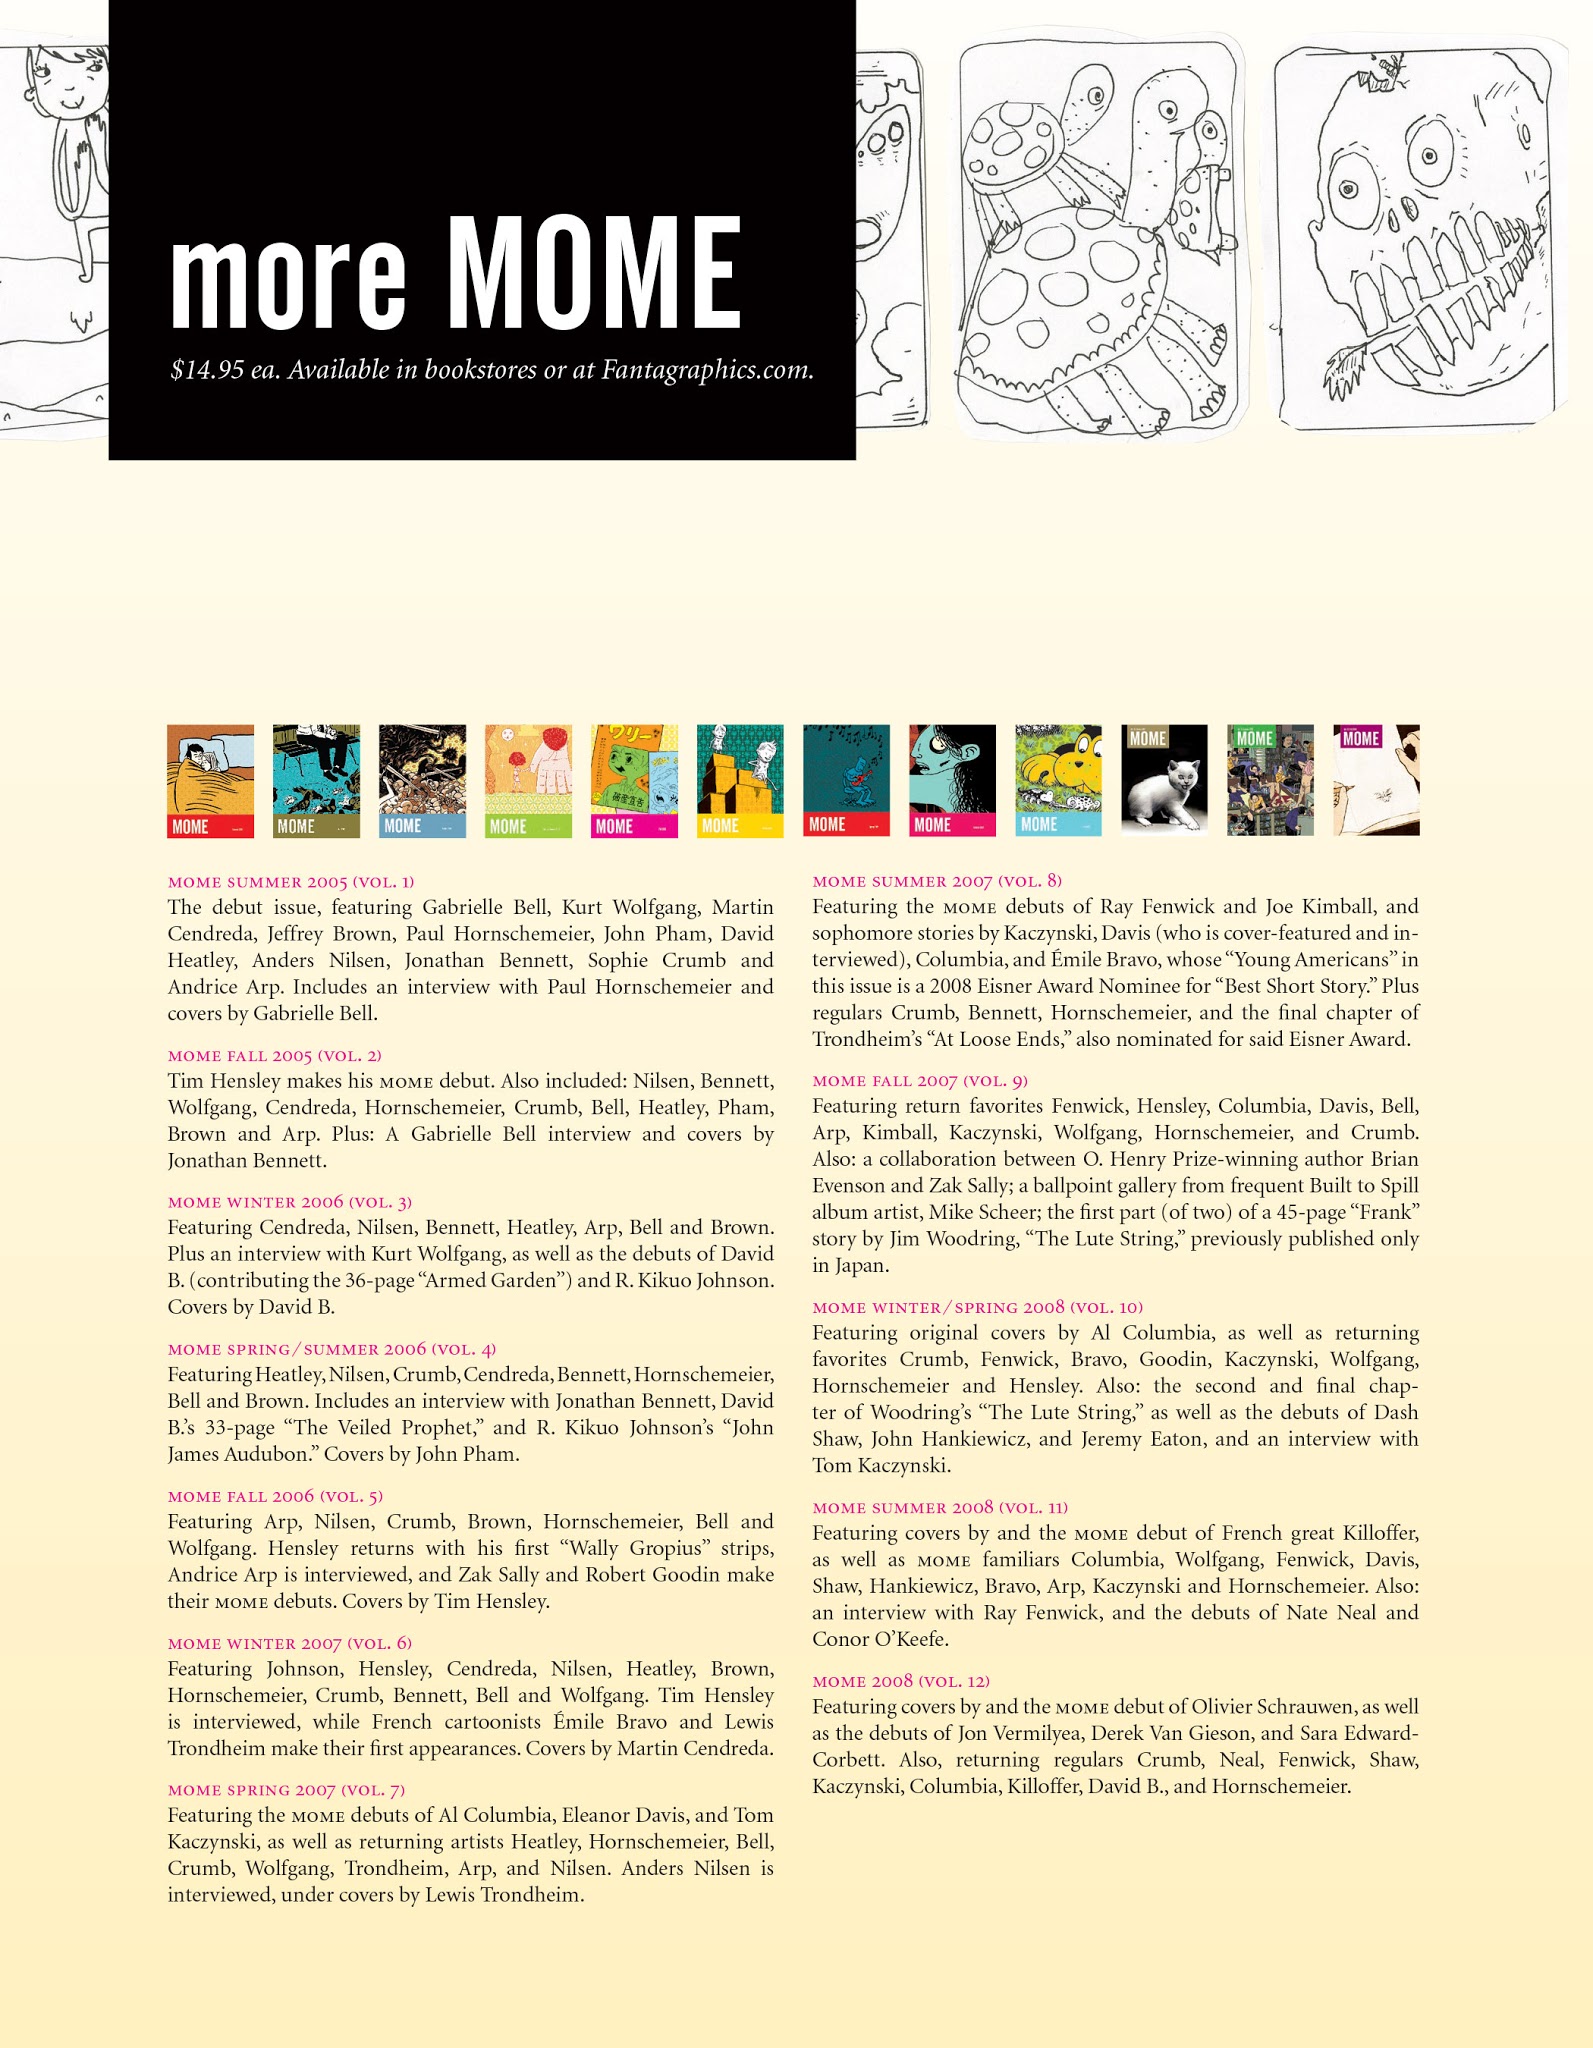 Read online Mome comic -  Issue # TPB 13 - 92